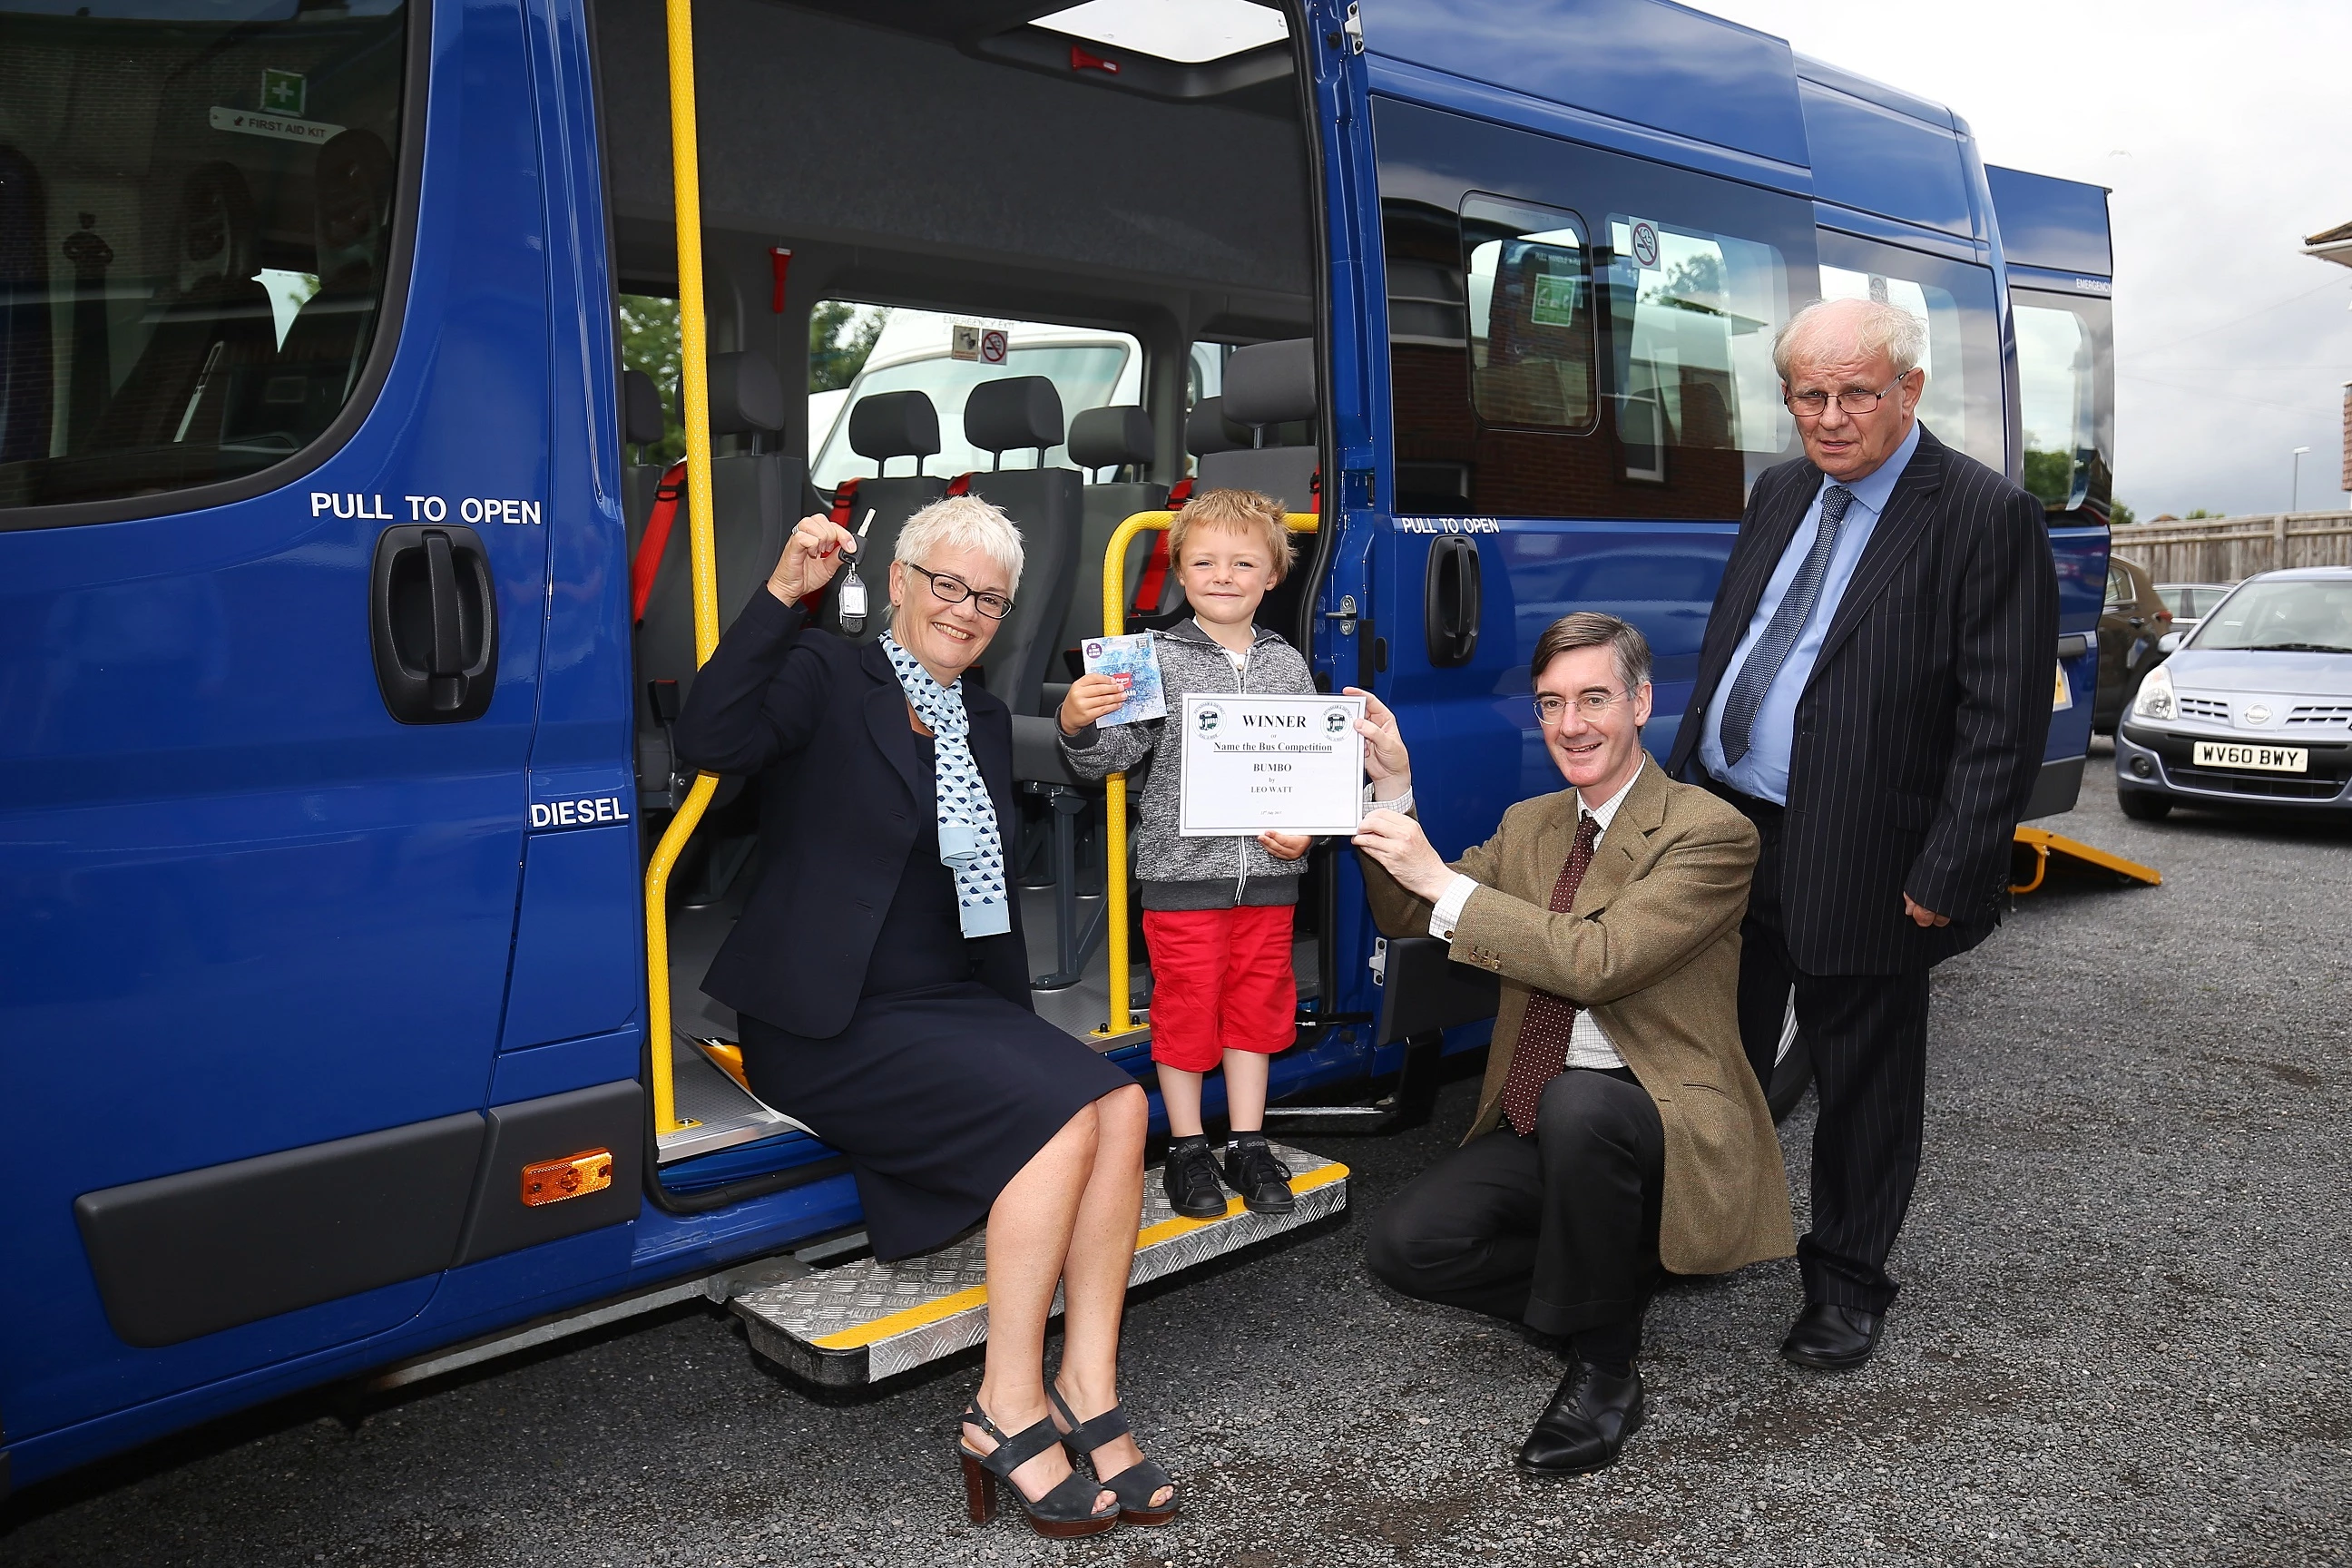 Barratt and David Wilson Homes sales adviser Kirstie Brown handing keys to the new bus over to Keynsham Dial a Ride, Cllr Brian Simmons, MP Jacob Rees-Mogg and competition winner Leo Watt aged 5 who named the bus.